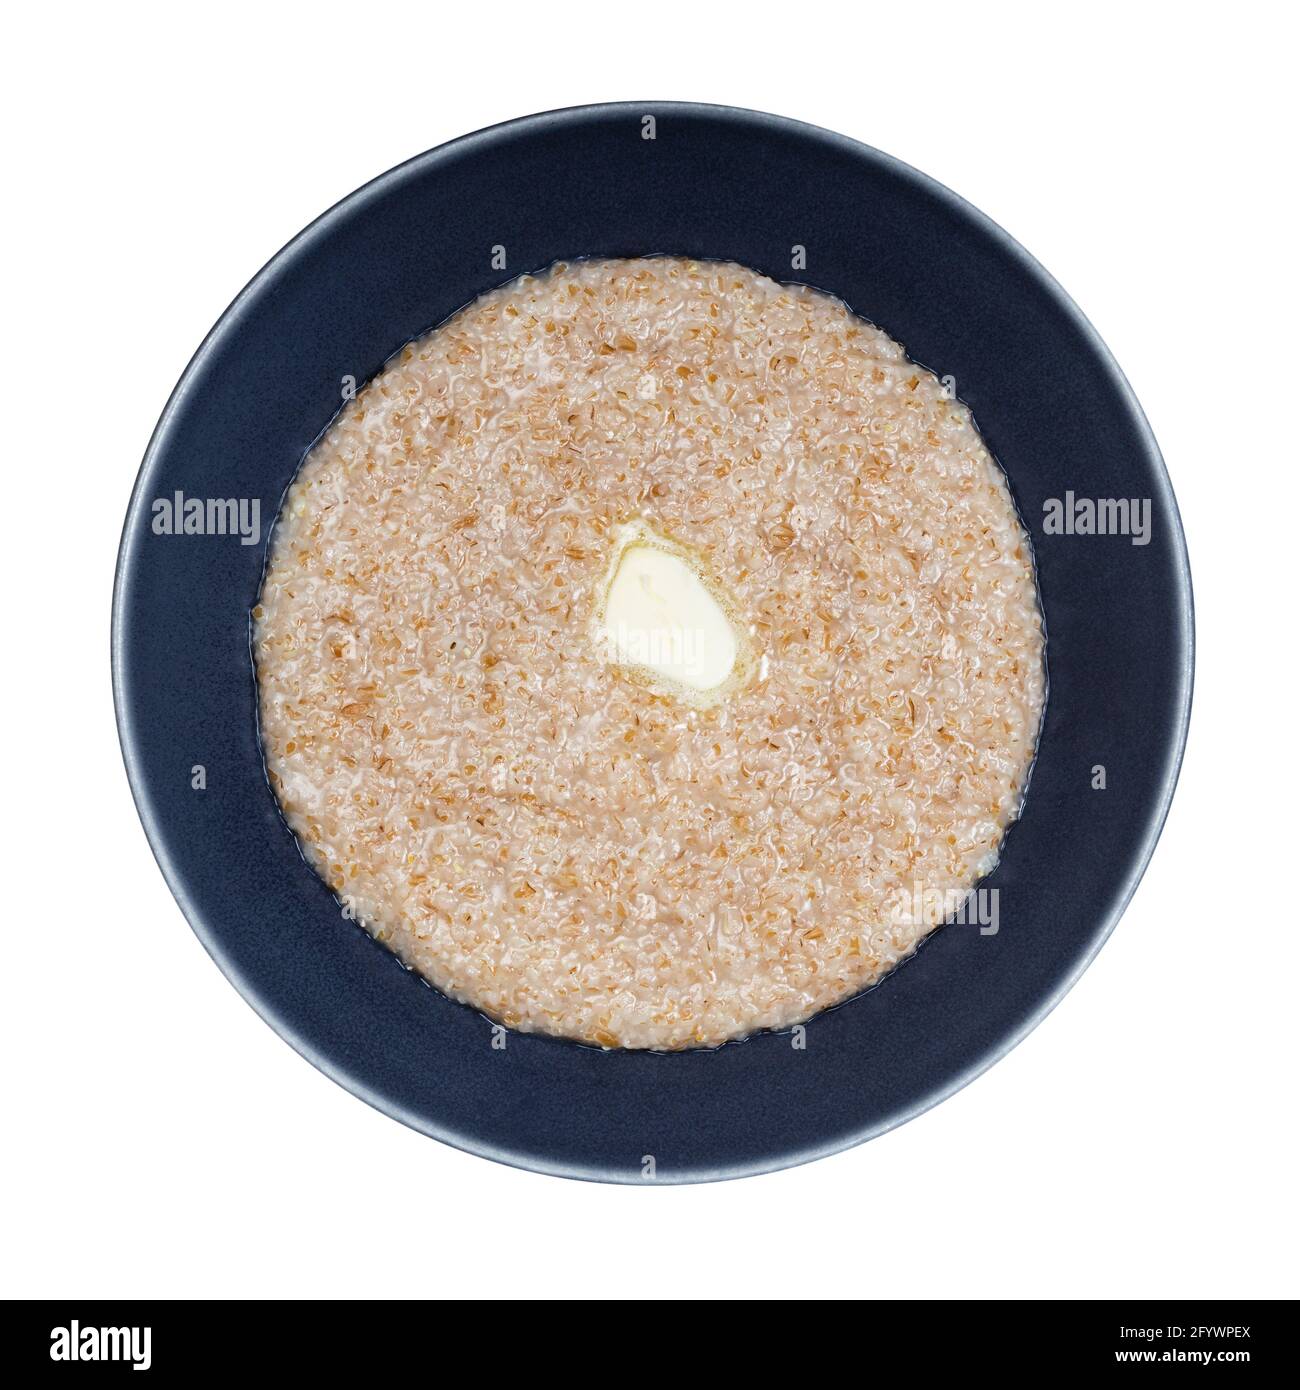 top view of buttered porridge from wheat groats (crushed partly hulled wheat grains) in gray bowl isolated on white background Stock Photo